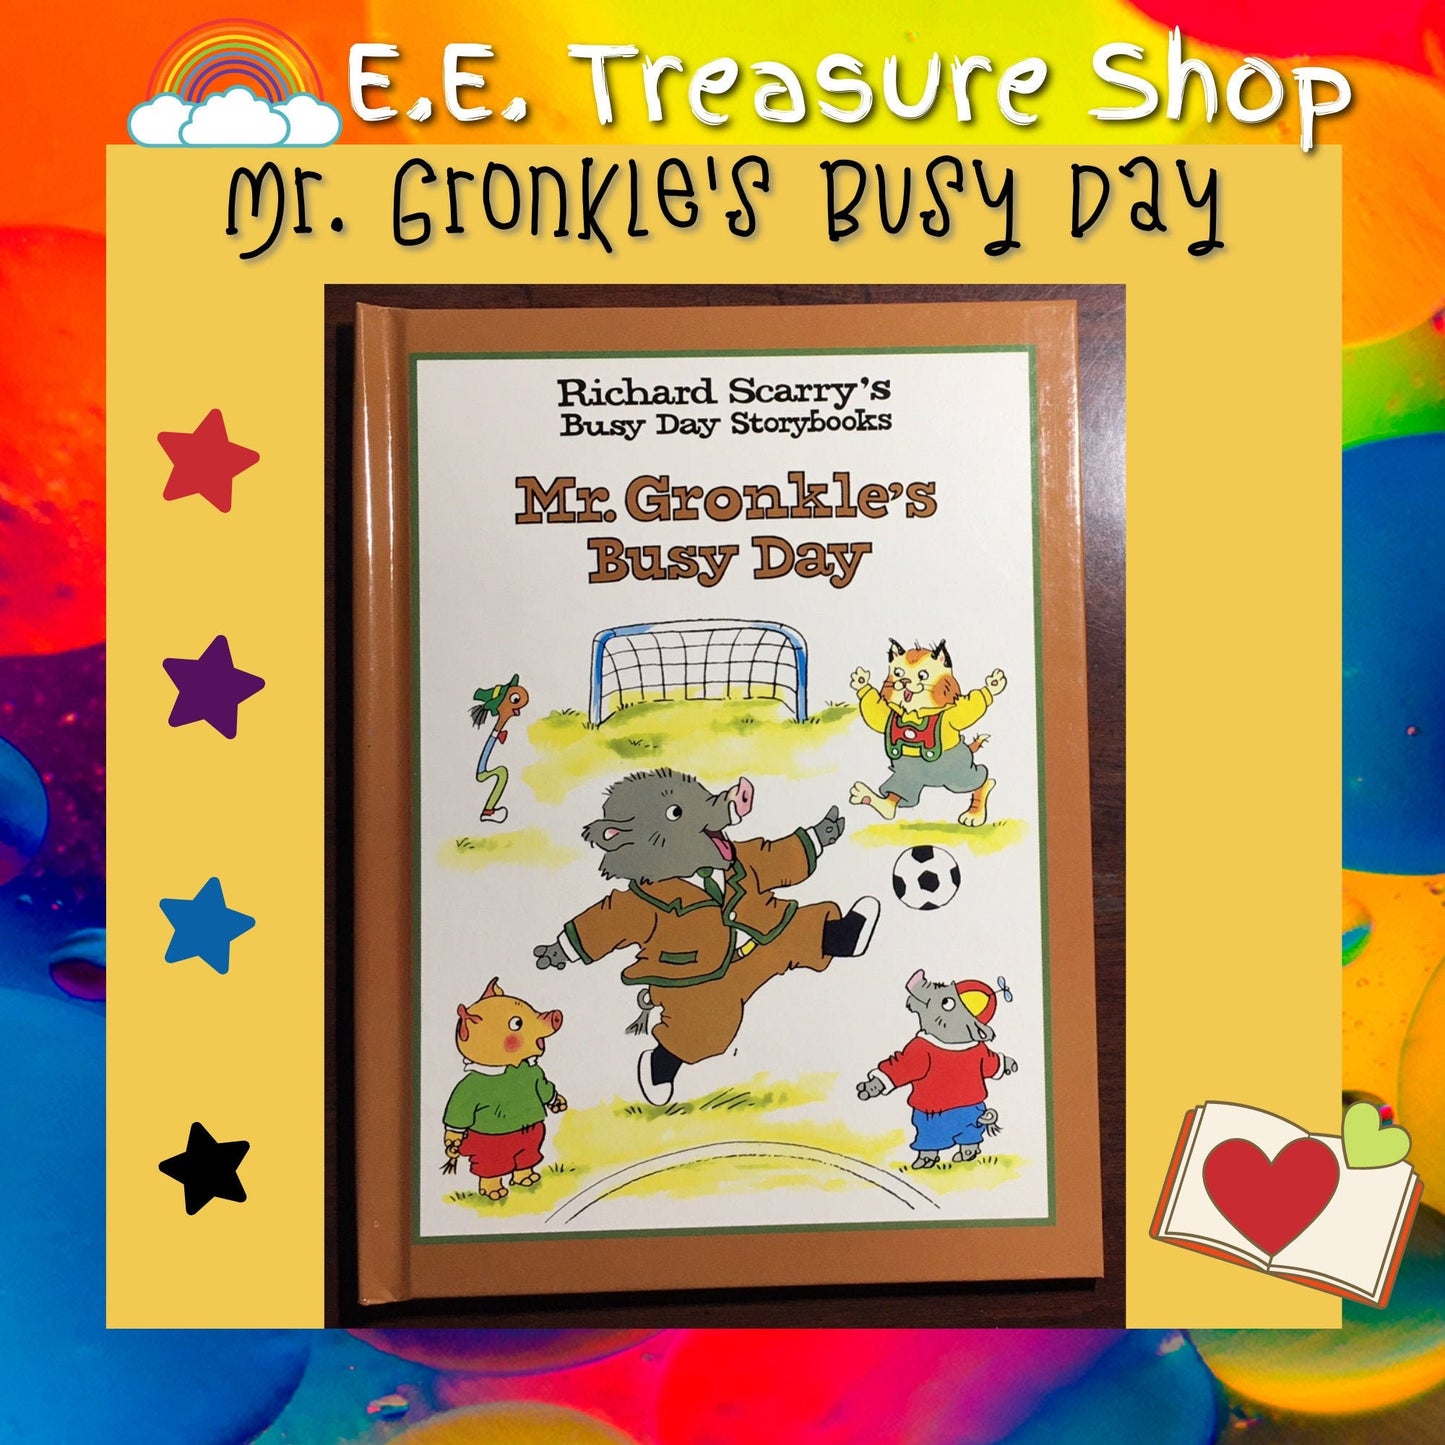 Richard Scarry, Mr. Gronkles Busy Day, Vintage 1997